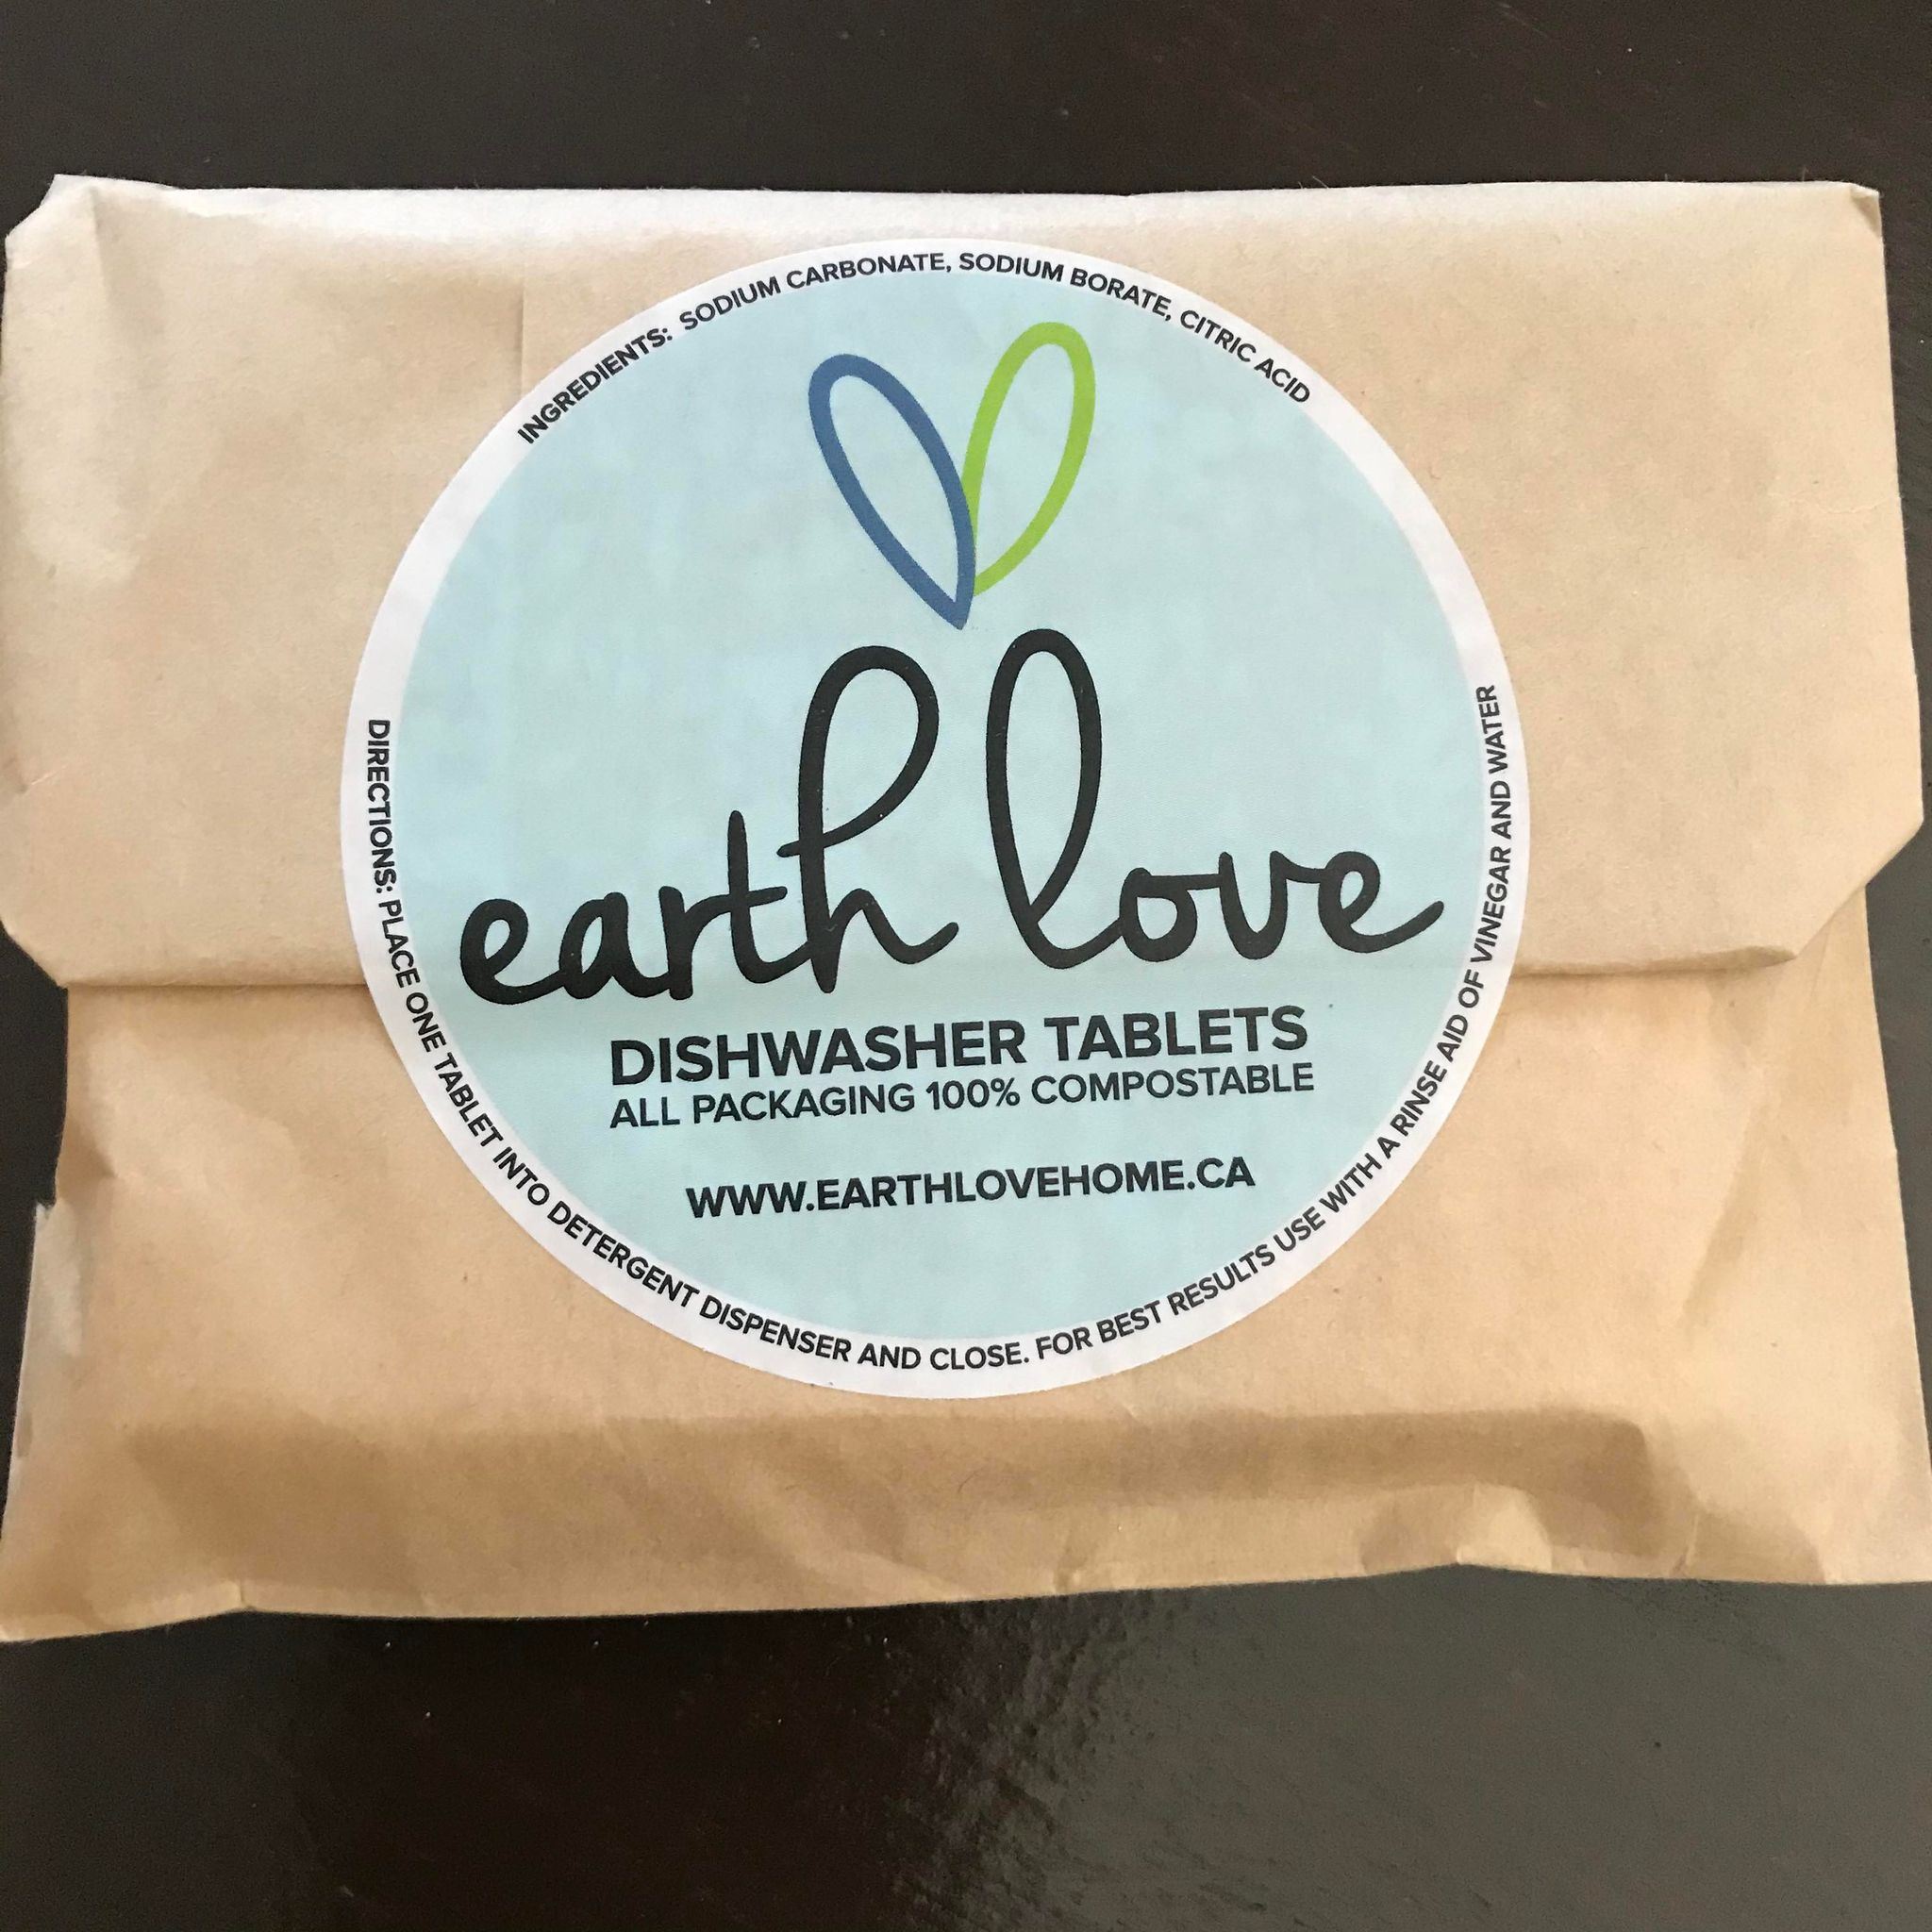 Earth love natural dishwasher tablets 12 pack in compostable packaging made in canada